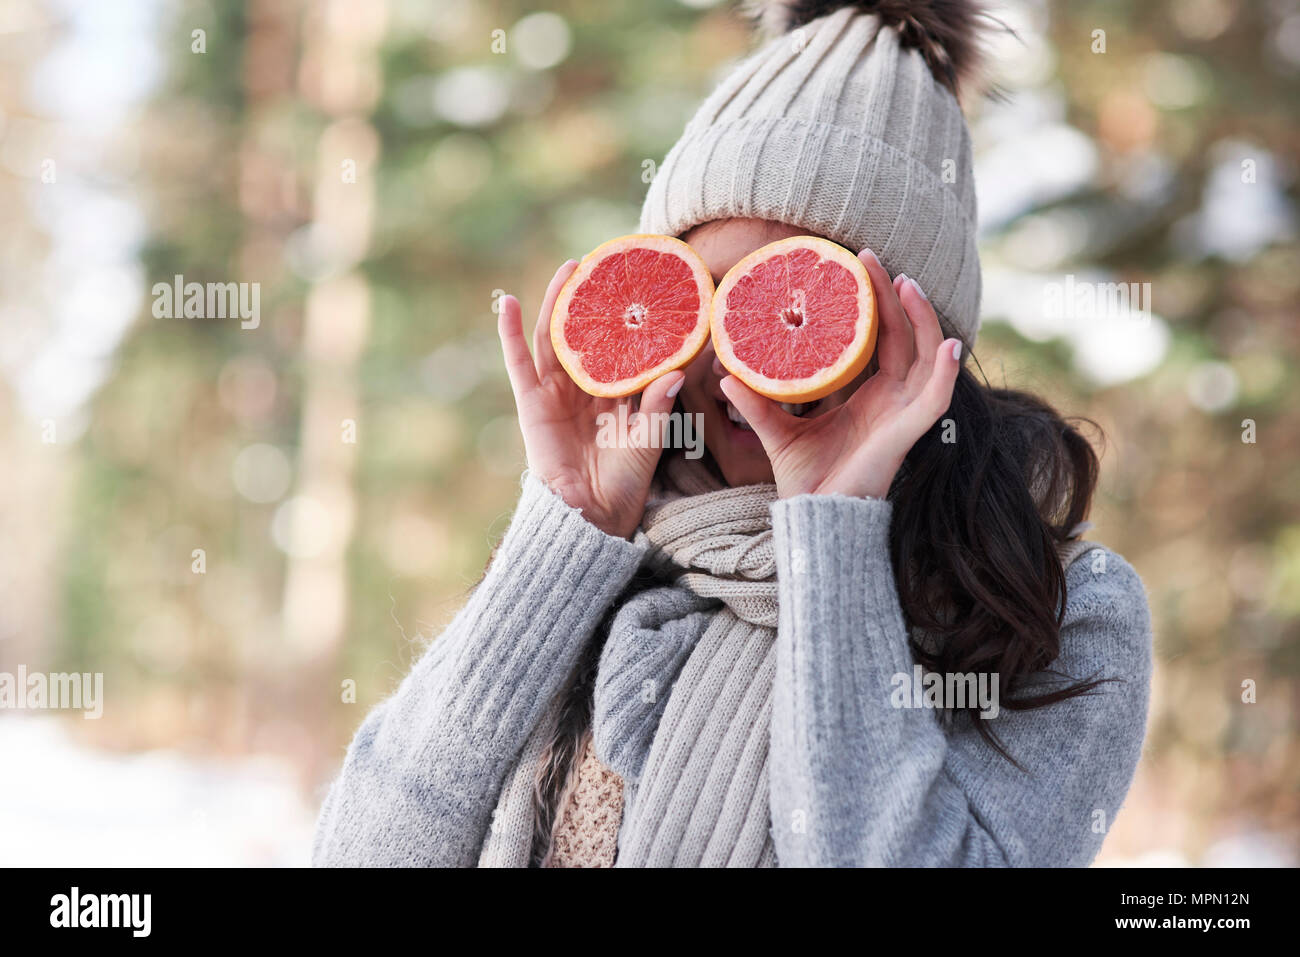 Laughing young woman wearing knitwear covering her eyes with halves of grapefruit Stock Photo